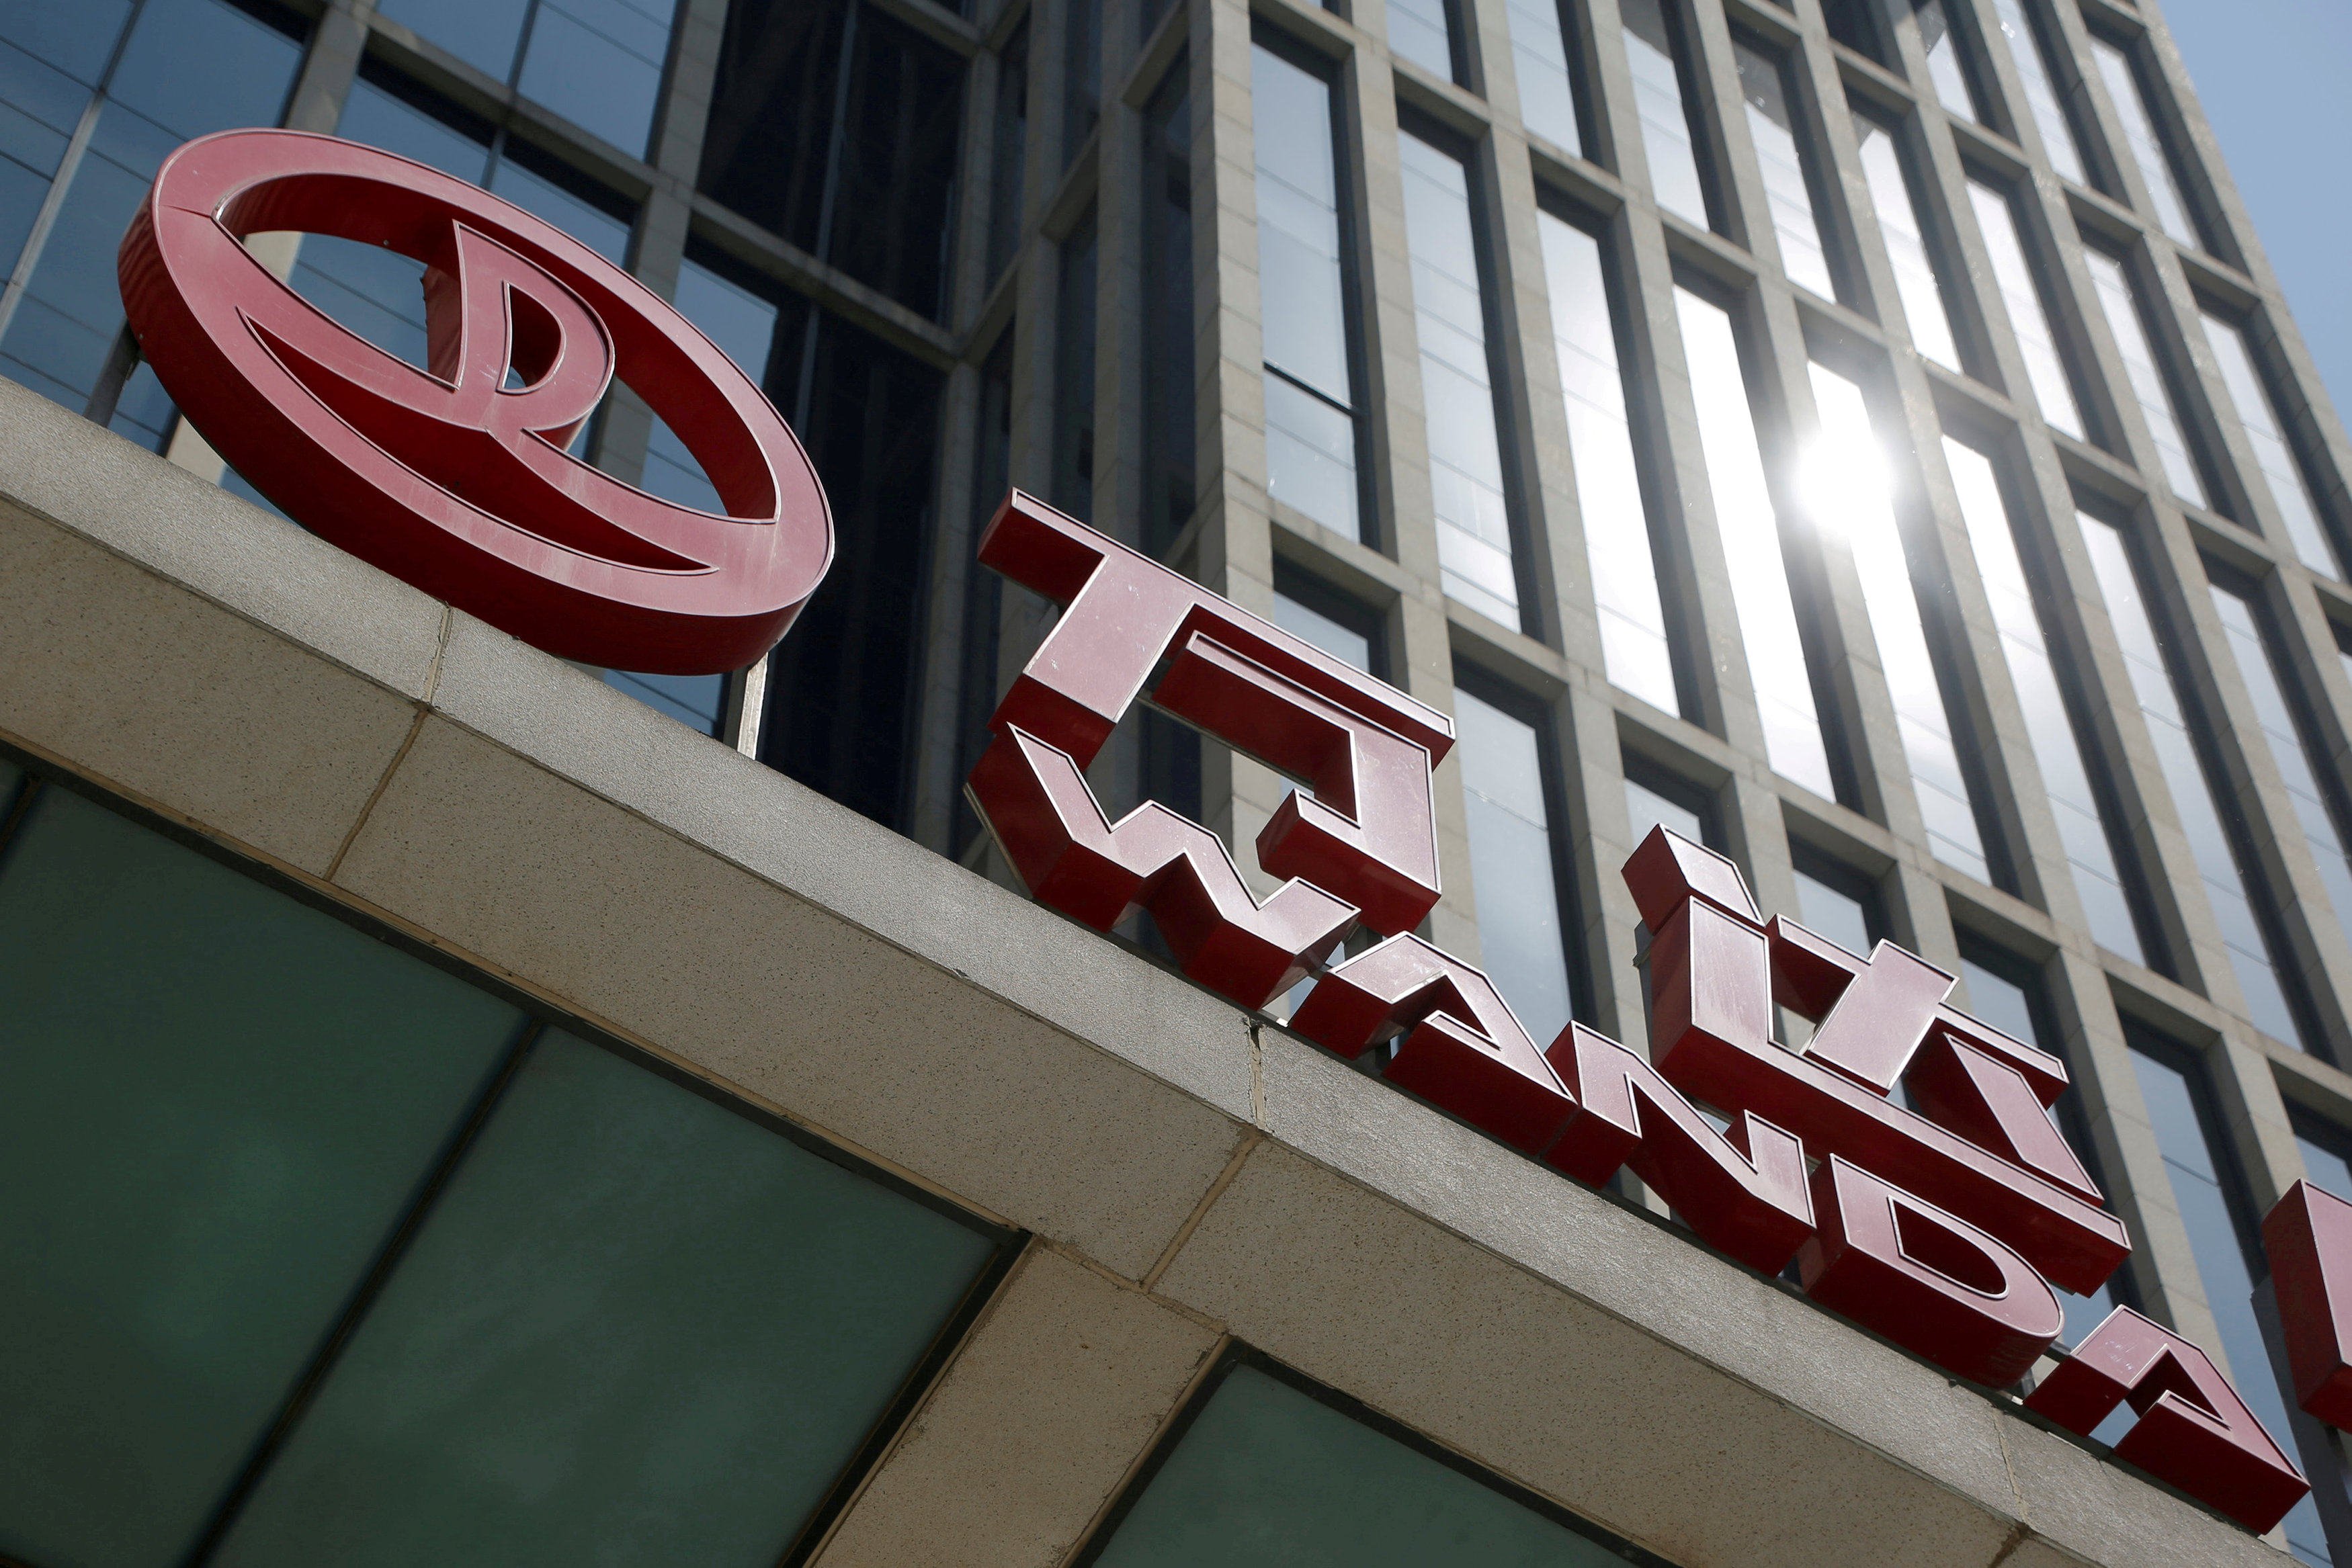 Dalian Wanda’s bonds and stocks have been hit by market jitters about its financial health in recent weeks. Photo: Reuters